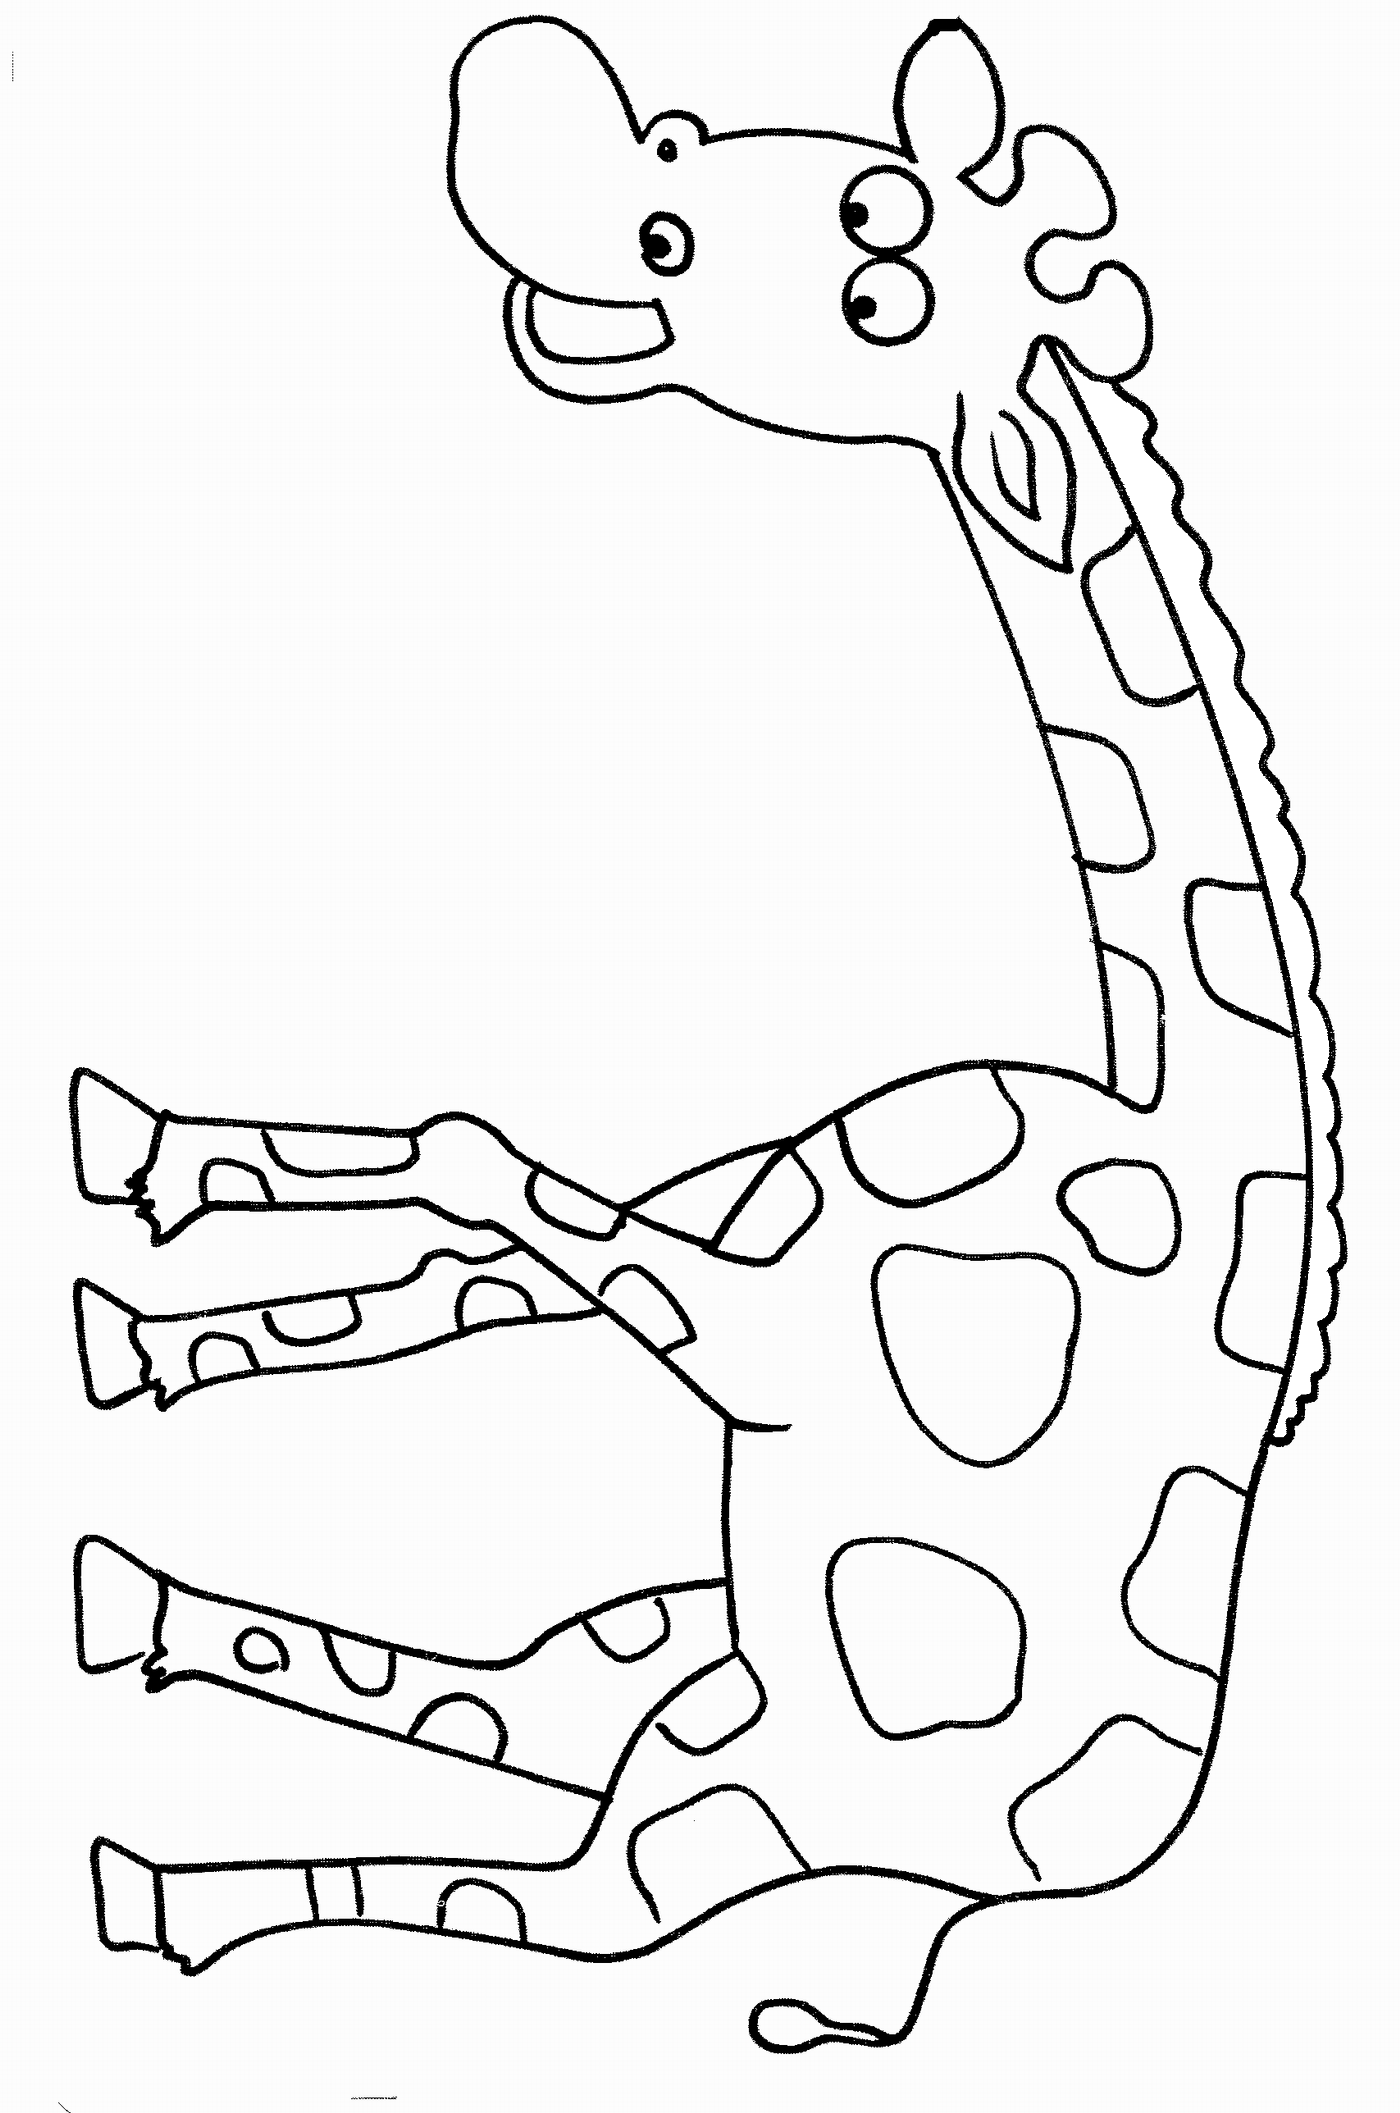 Coloring Picture Of Giraffe / Giraffe Coloring Pages